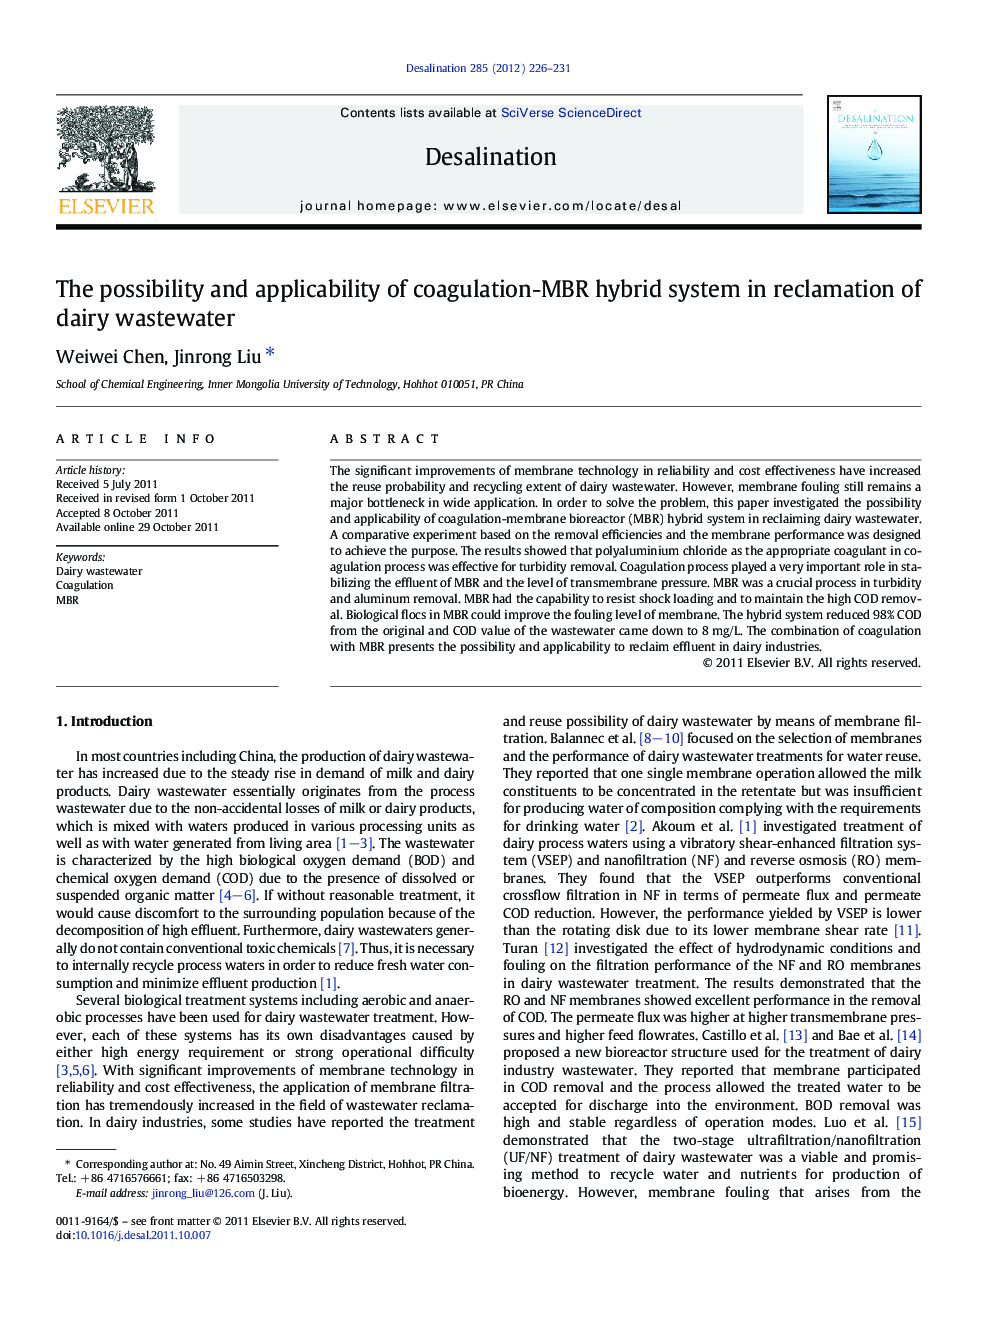 The possibility and applicability of coagulation-MBR hybrid system in reclamation of dairy wastewater